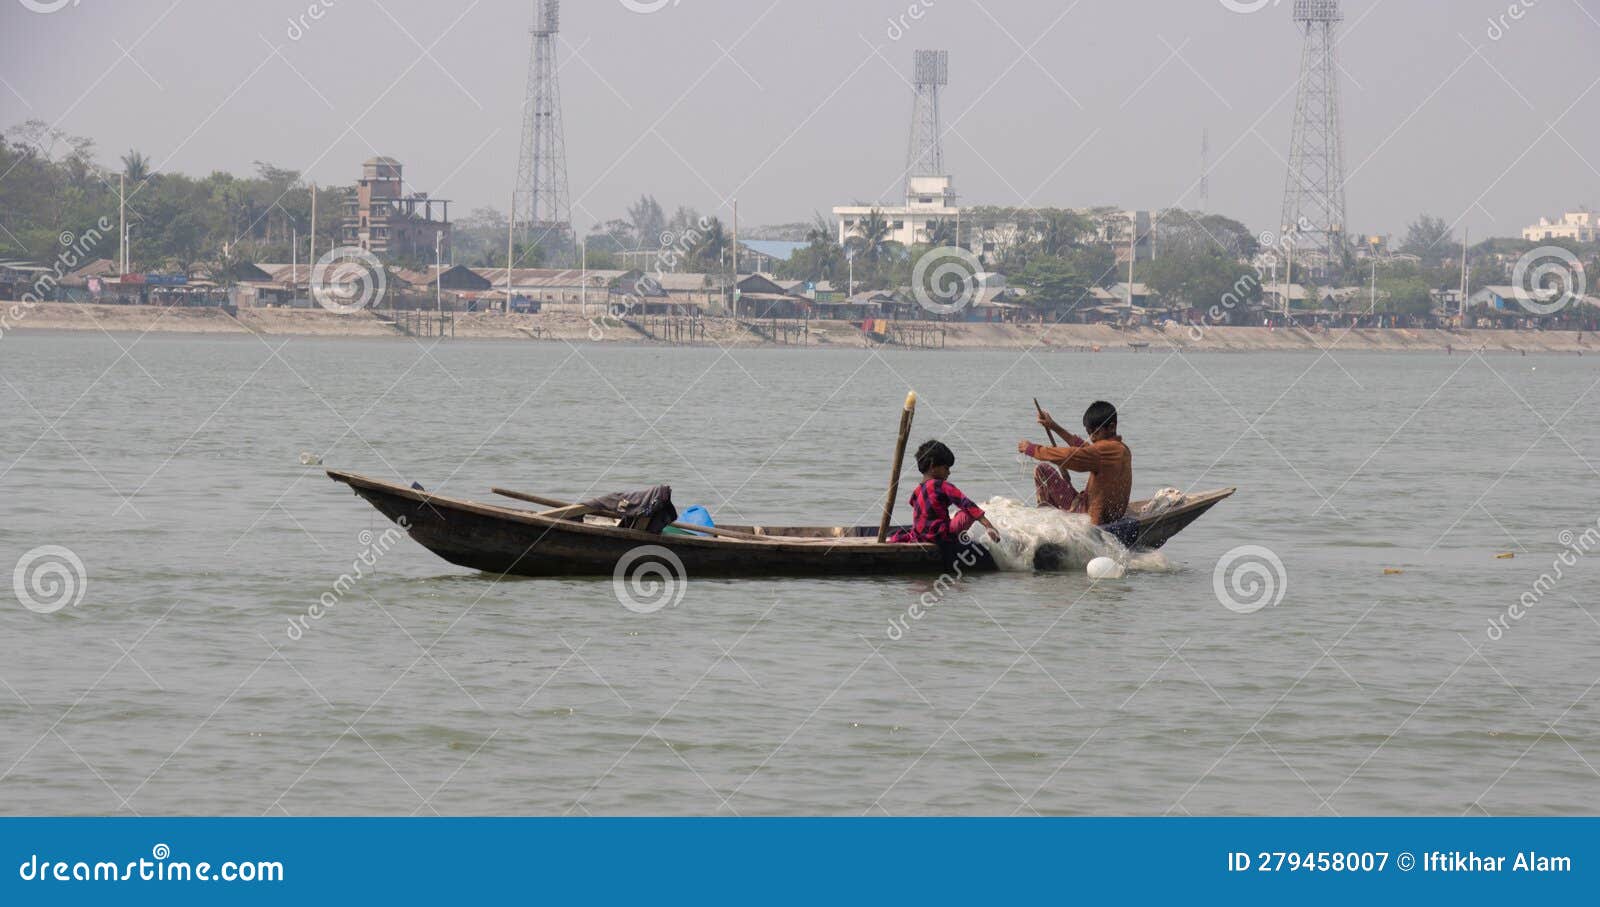 Barisal, Bangladesh, March 12, 2023, Rural Fishermen on a Small Wooden  Boat. Kids Catching Fish on a Small Dinghy Floating on a Editorial  Photography - Image of fishery, ecology: 279458007